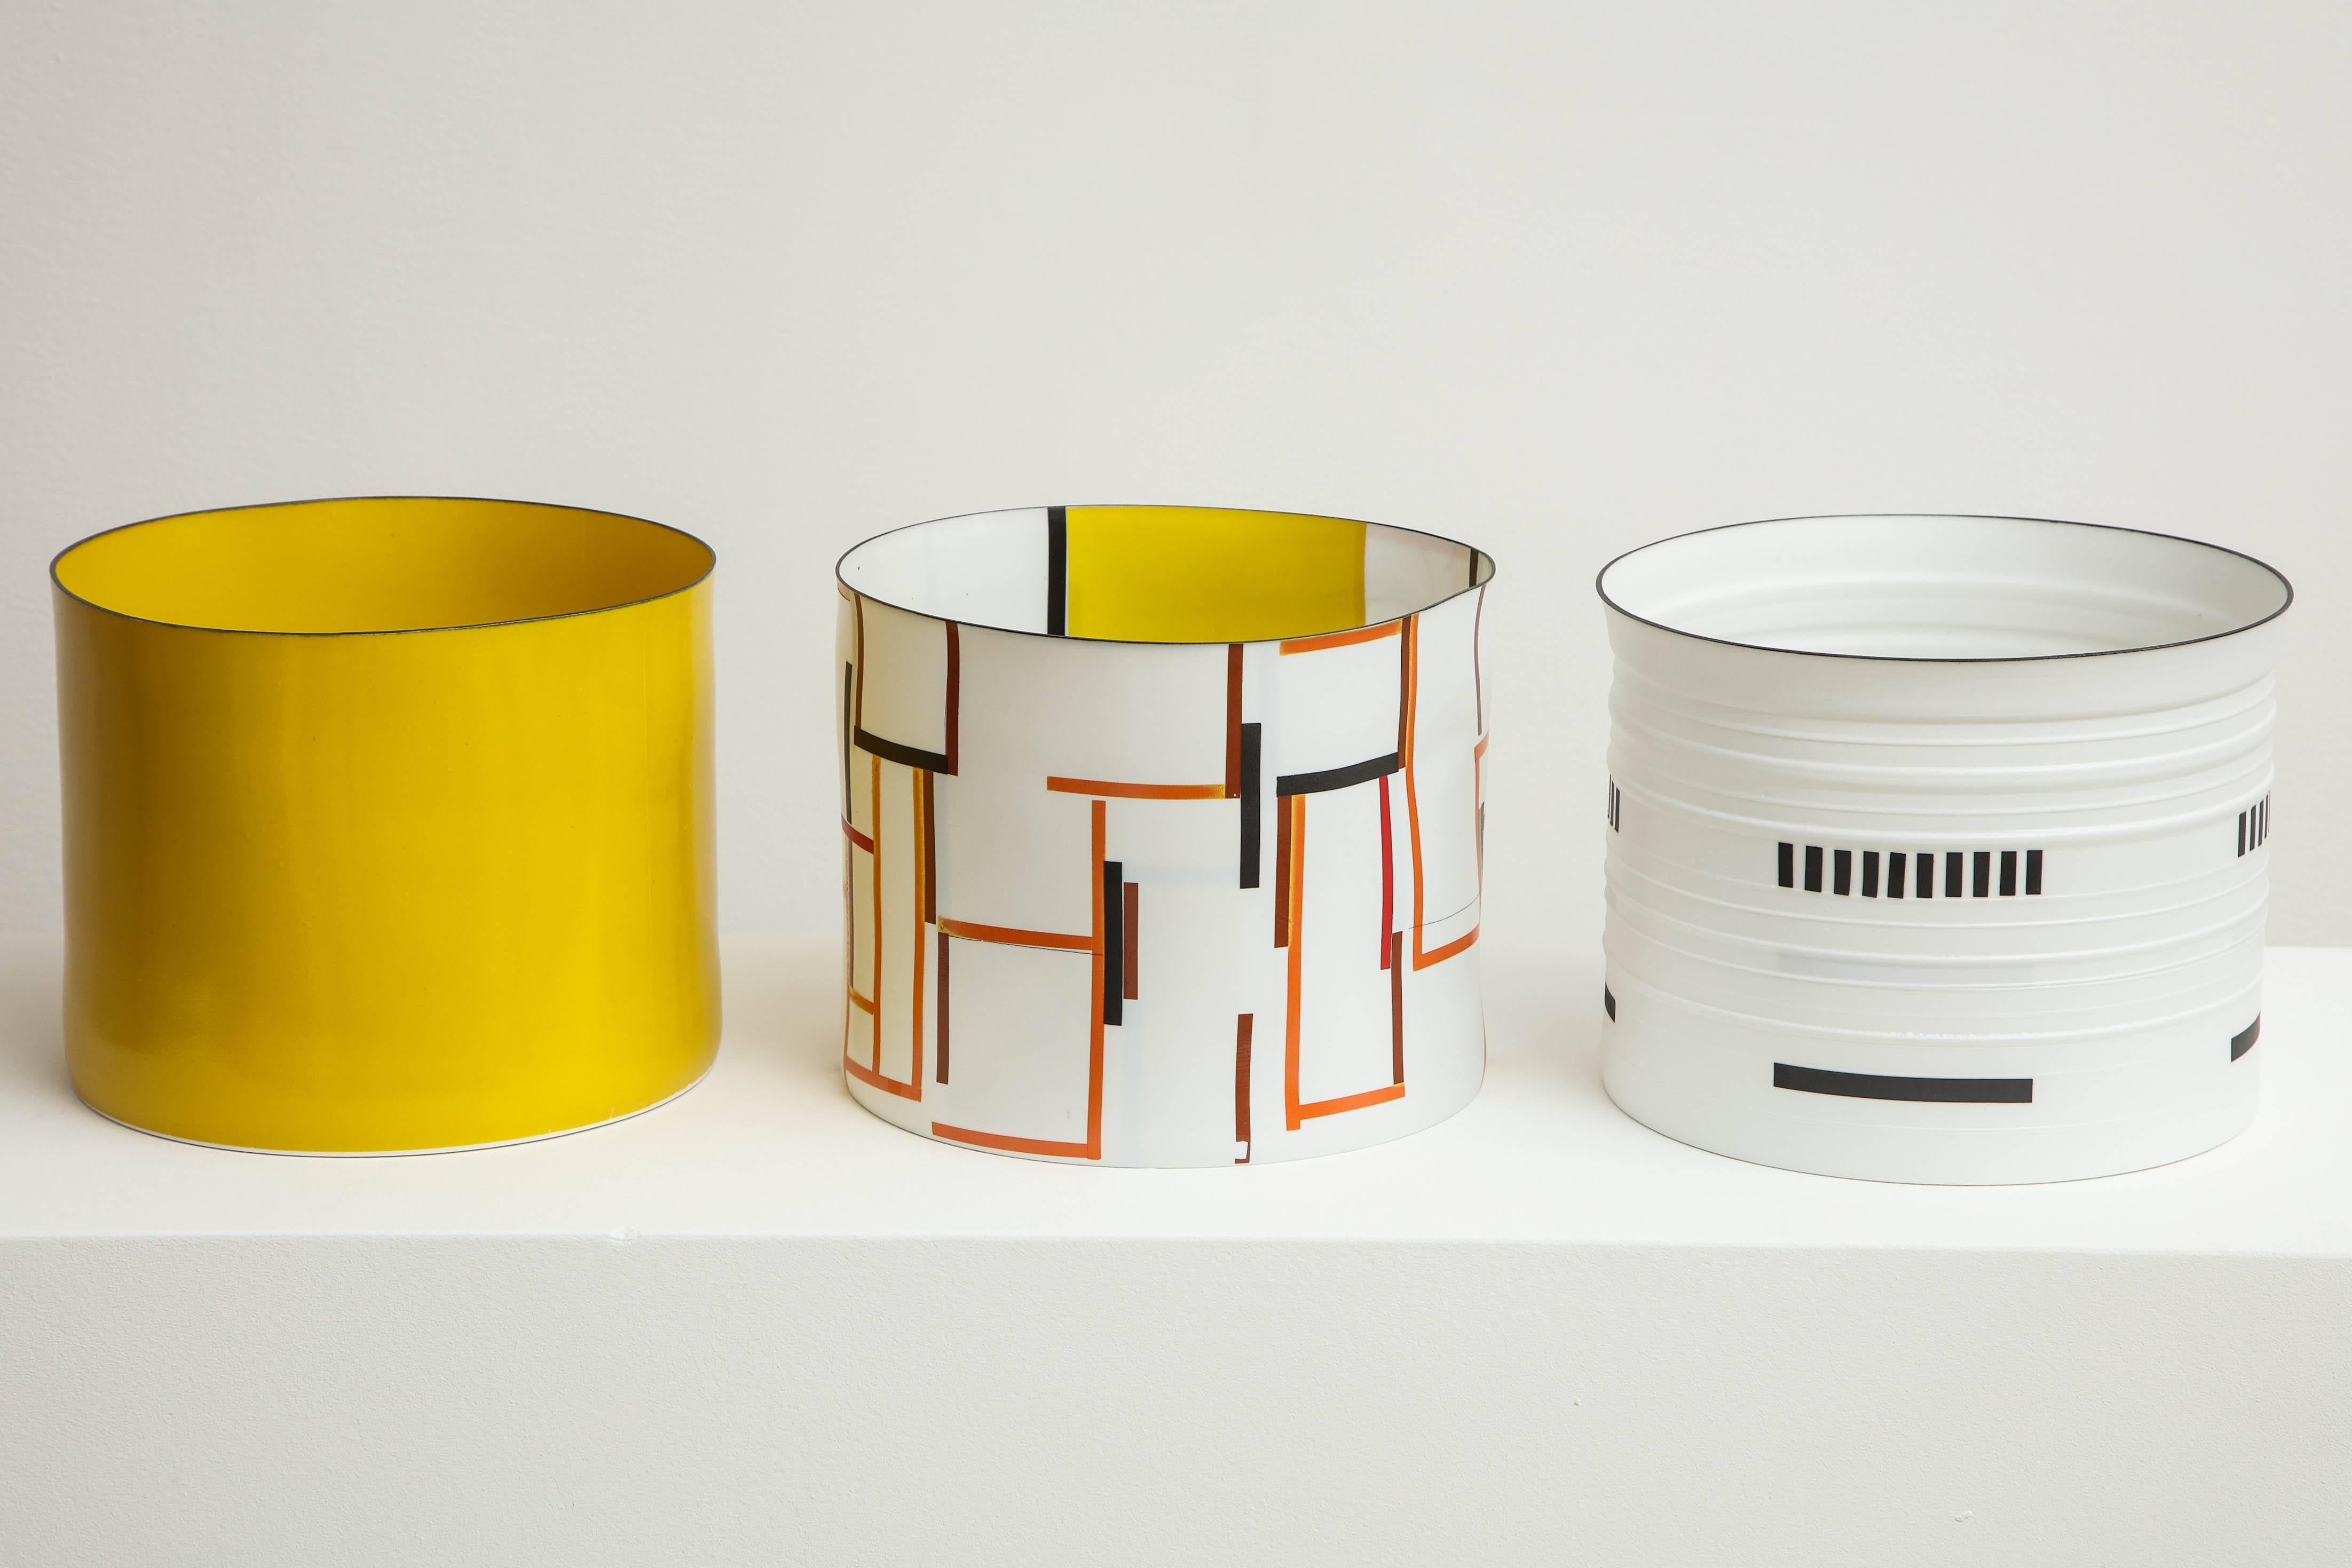 Bodil Manz is a ceramicist known for her use of ultra-thin, translucent eggshell porcelain to create distinctive cylindrical forms, anchored by bold, geometric abstractions in a style evocative of Russian Suprematism. Manz was born in Copenhagen in